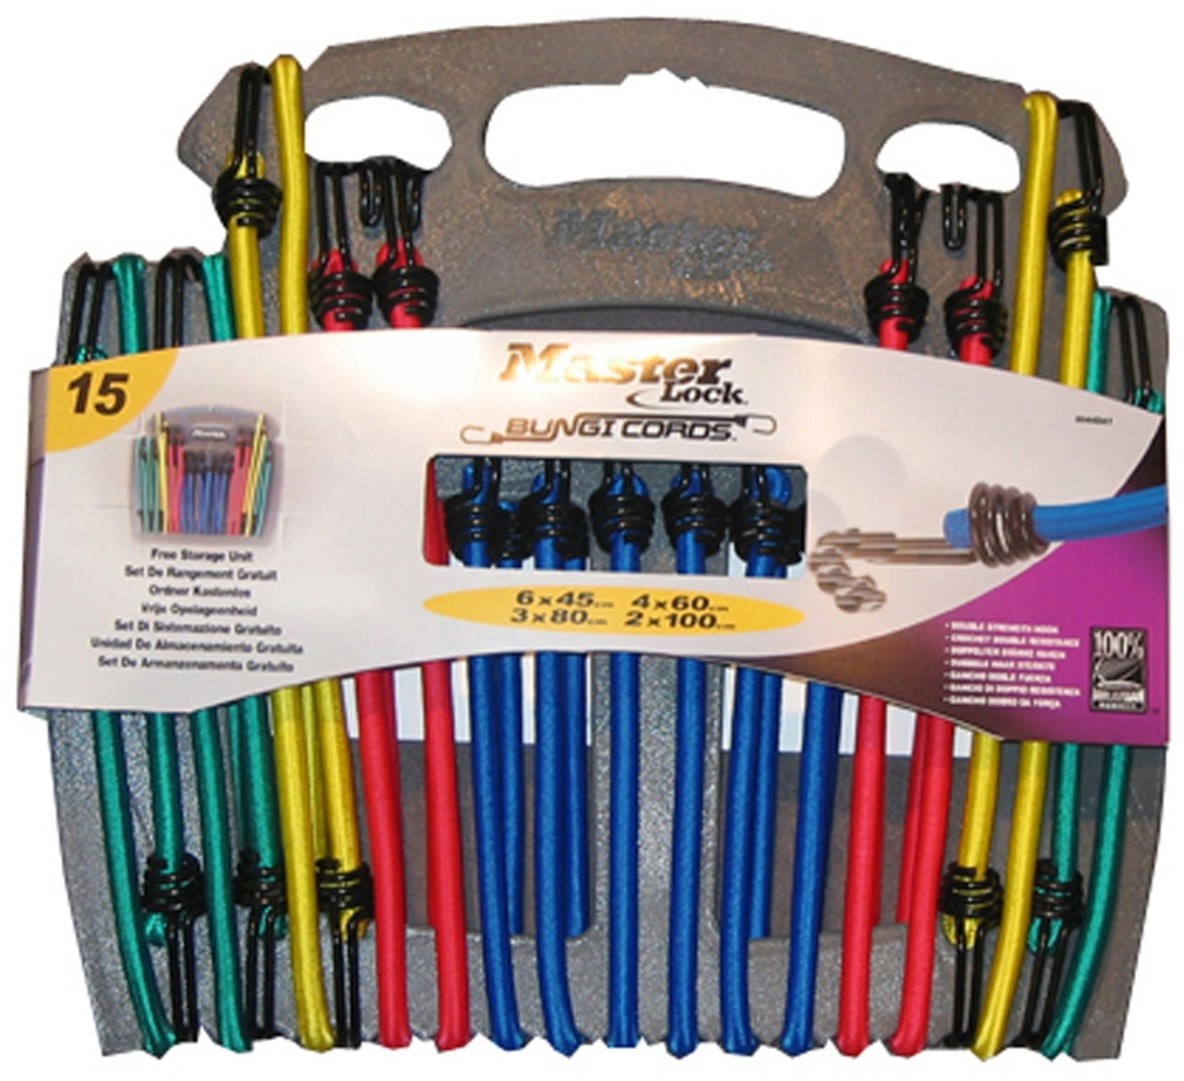 Master Lock 15 Piece Bungee Organiser With Reverse Hooks product image